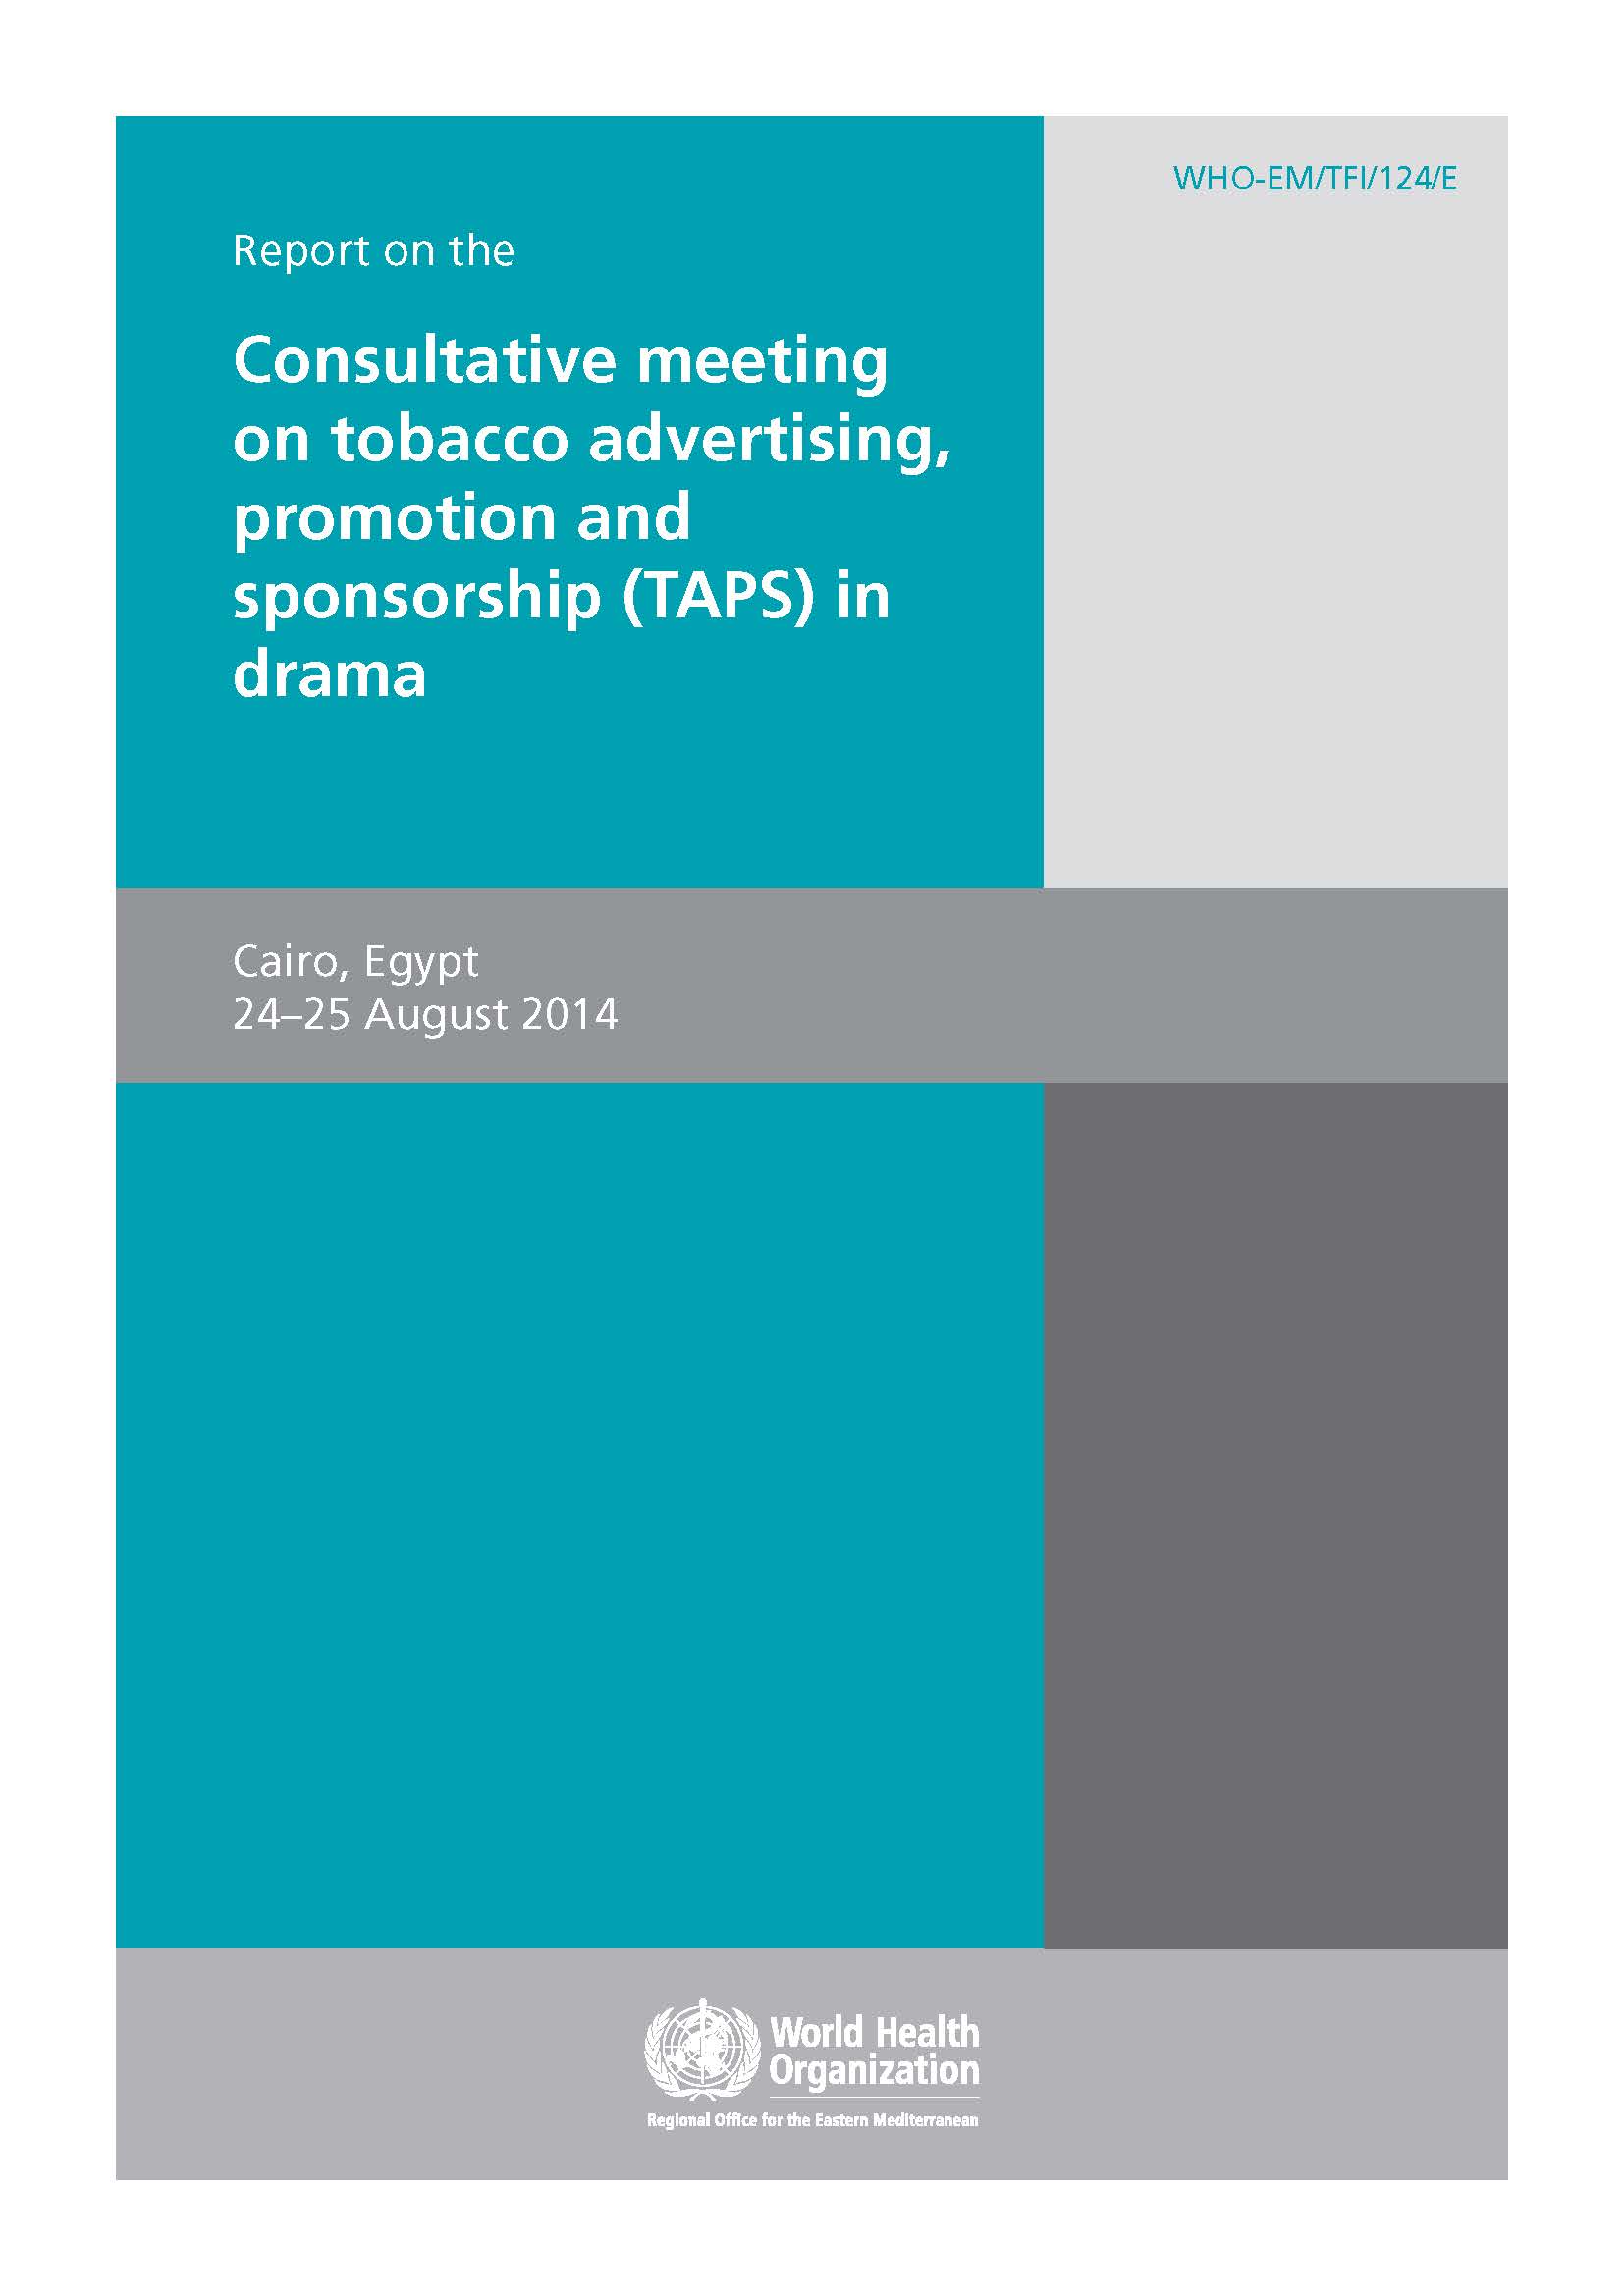 Summary report consultation on tobacco advertising in drama